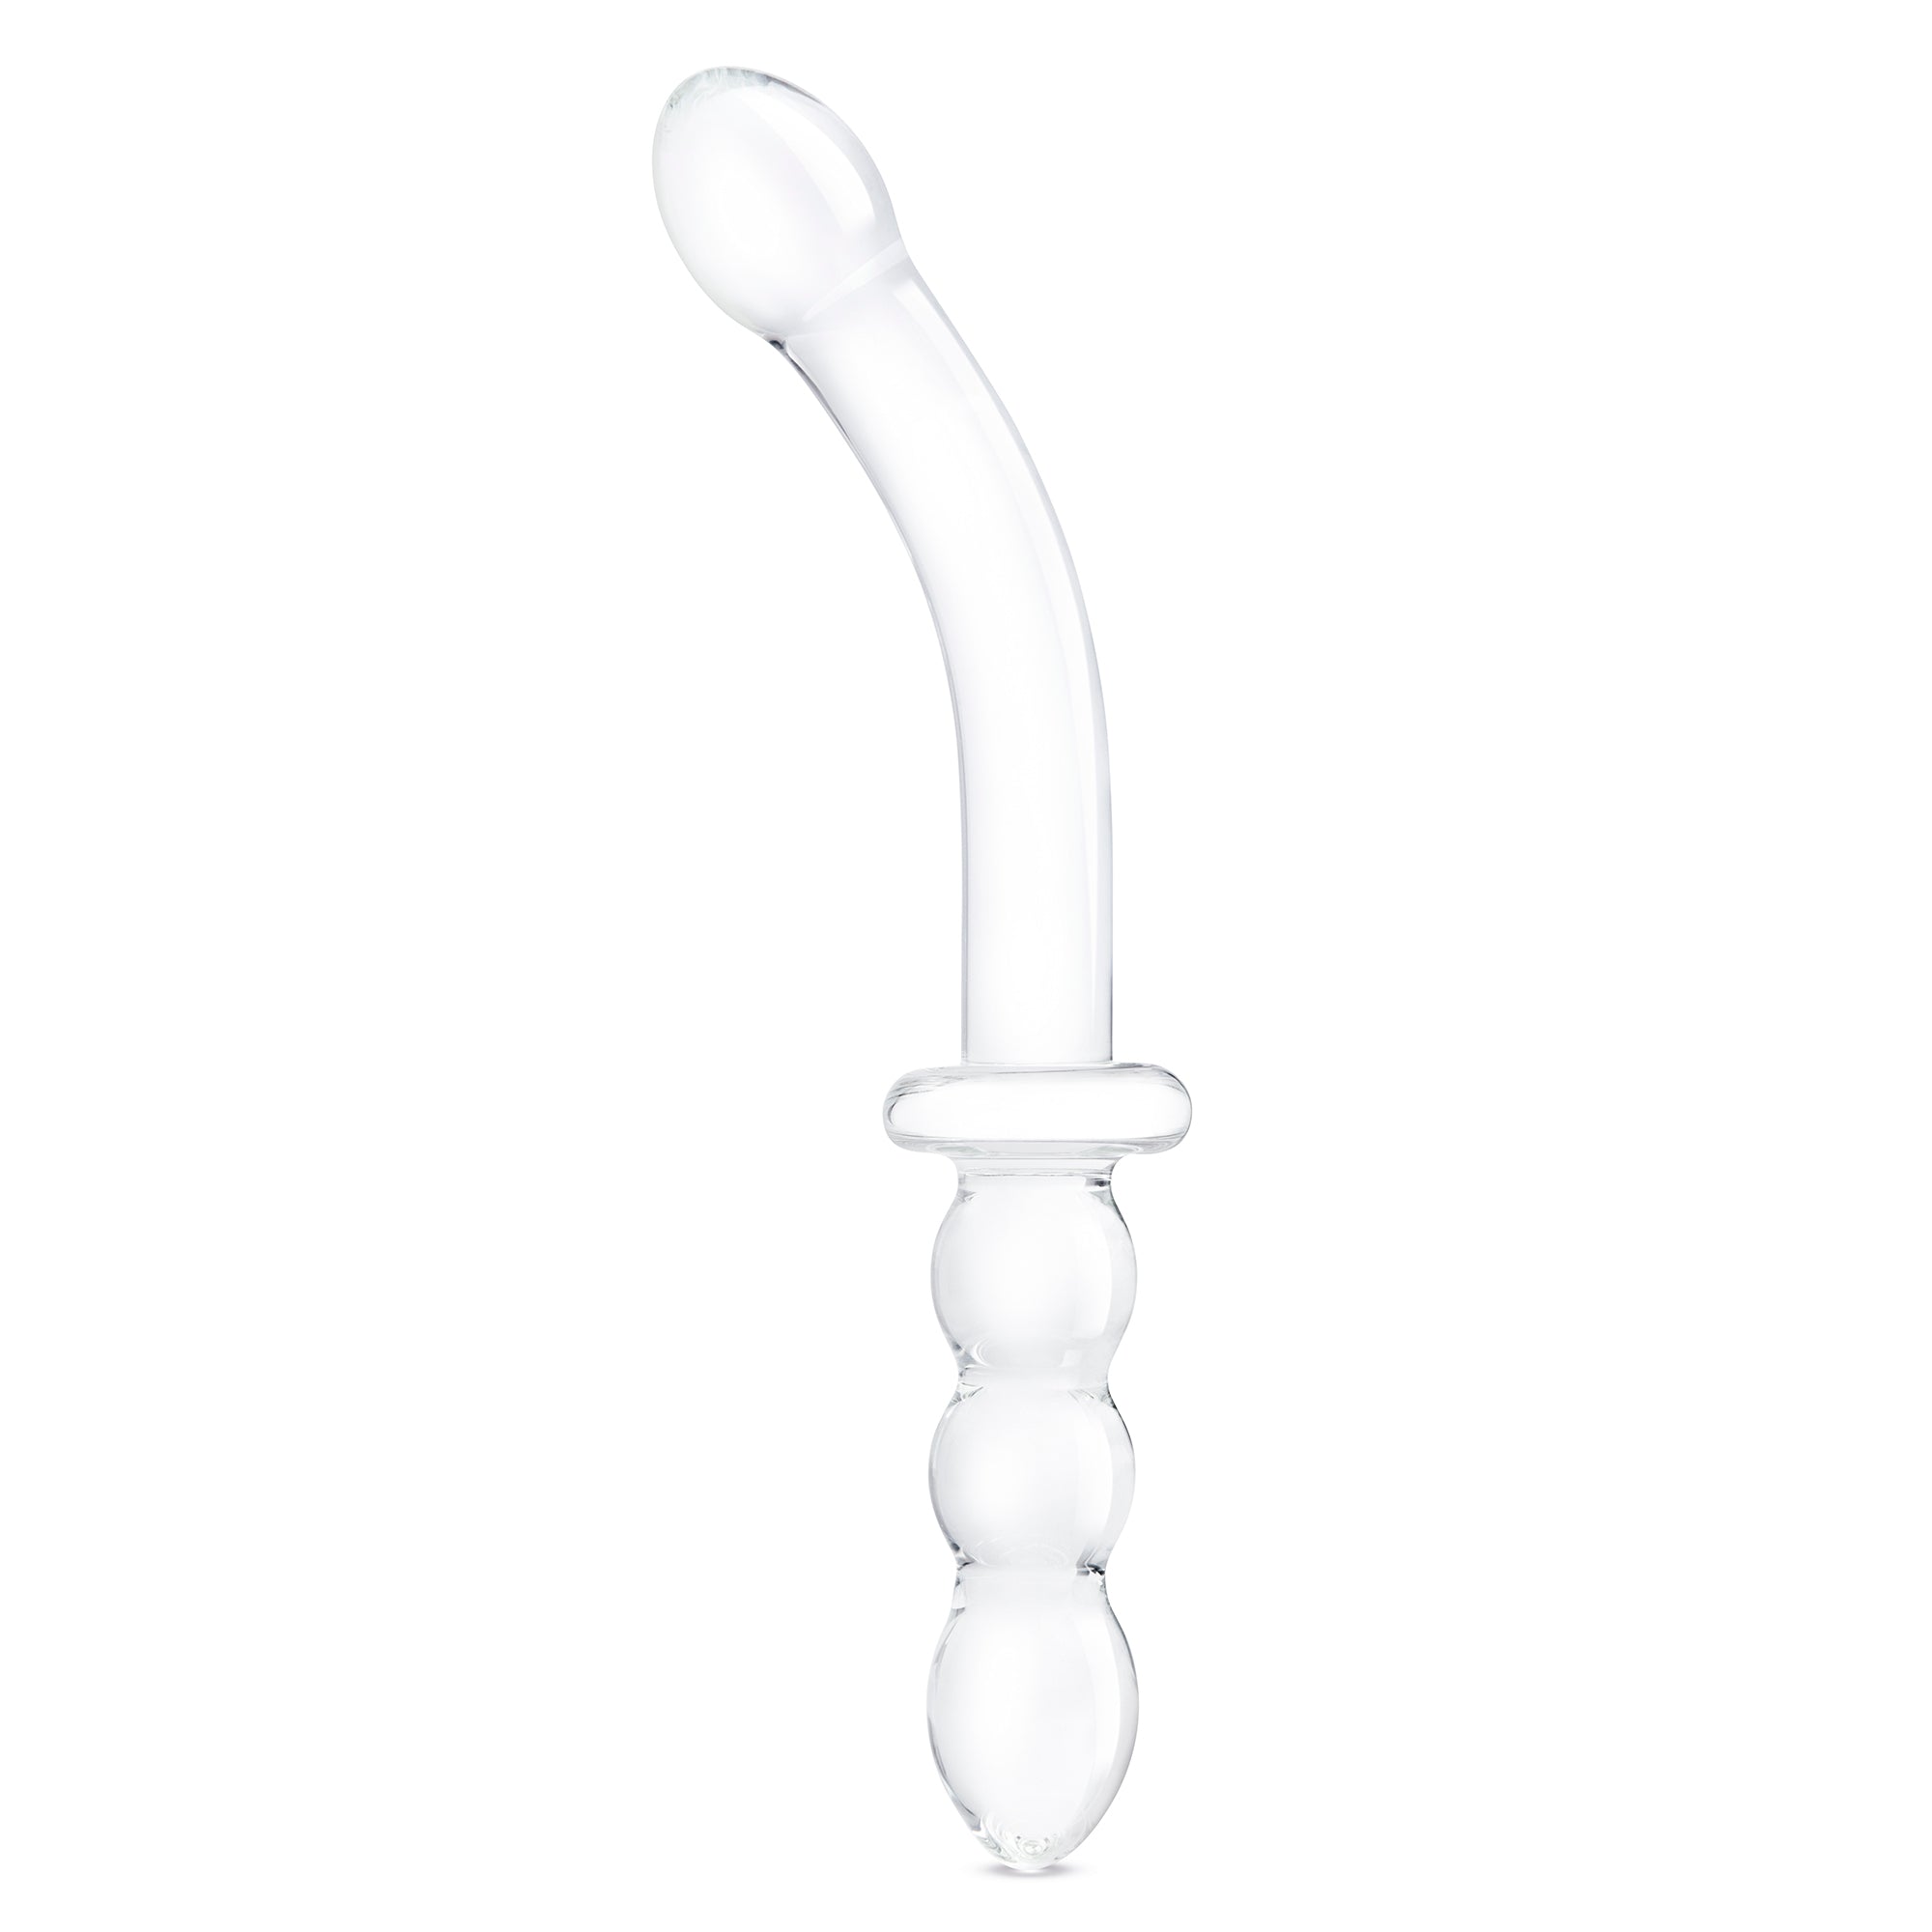 12" Girthy Ribbed G-Spot Glass Dildo With Handle Grip Double Ended